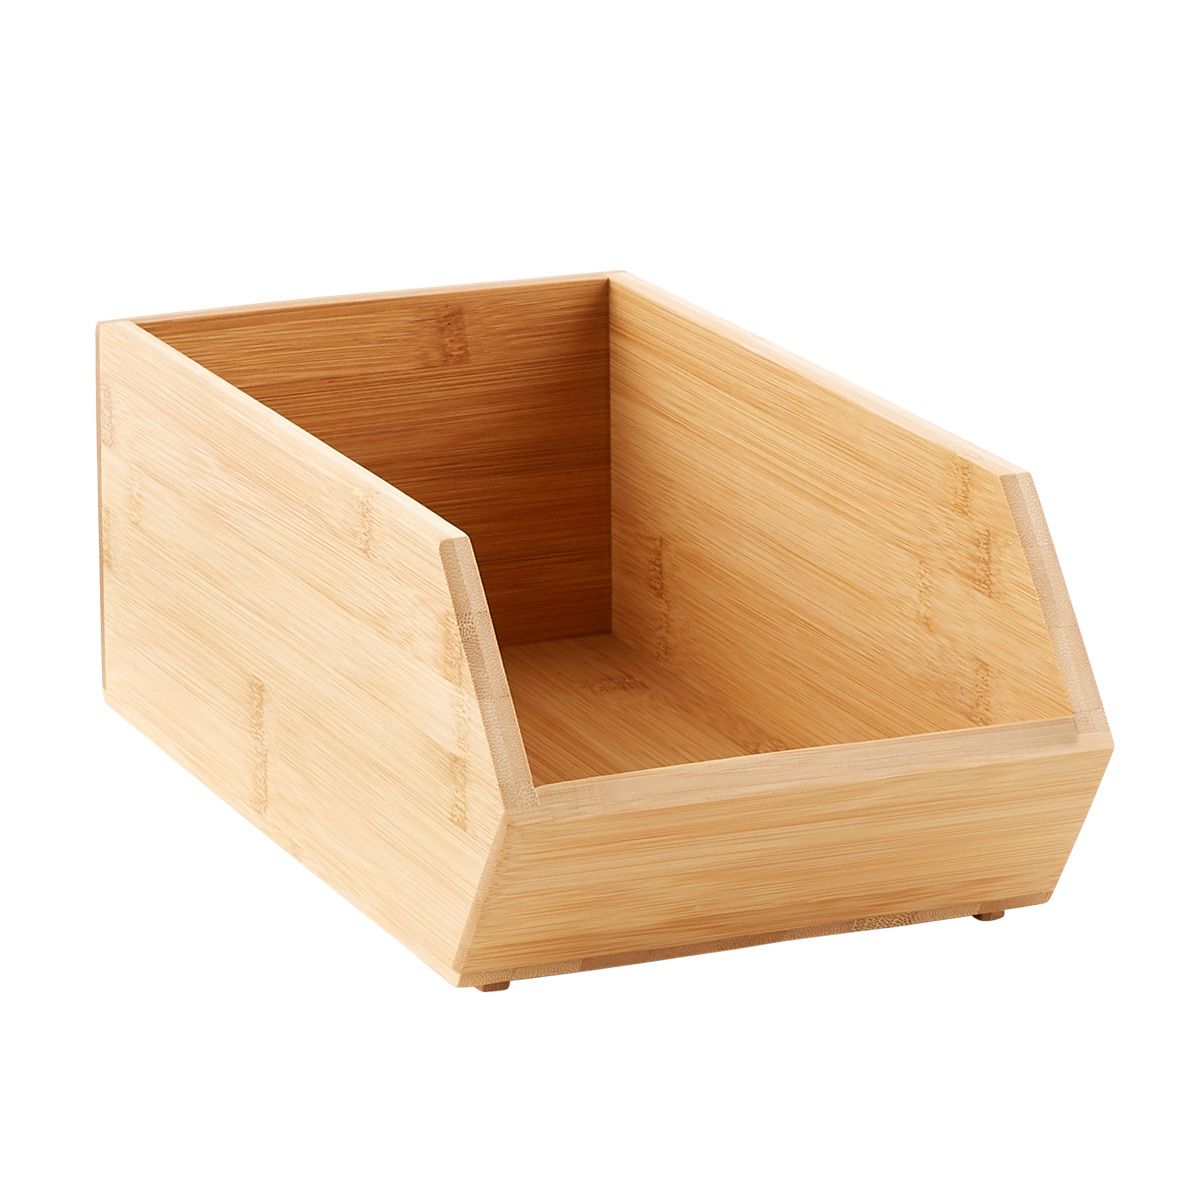 Medium Deep Stacking Bamboo Bin Natural | The Container Store